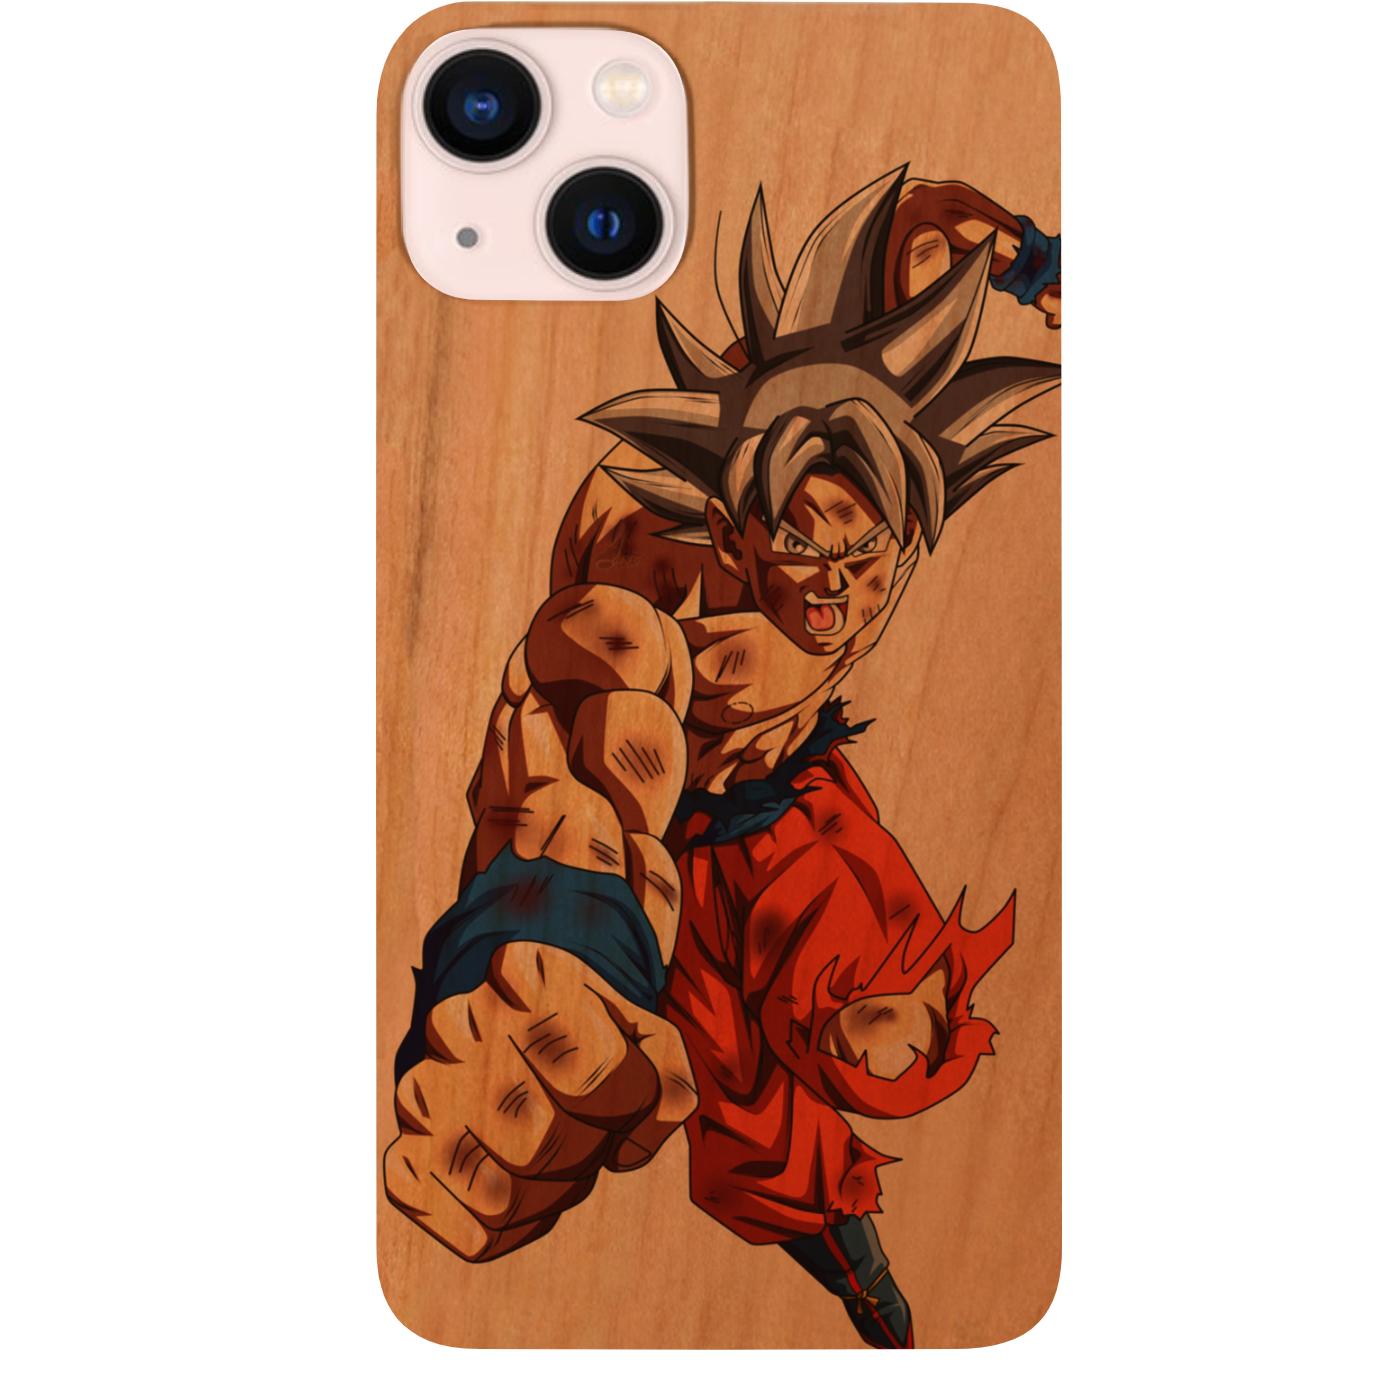 Goku Fictional Character 2 - UV Color Printed Phone Case